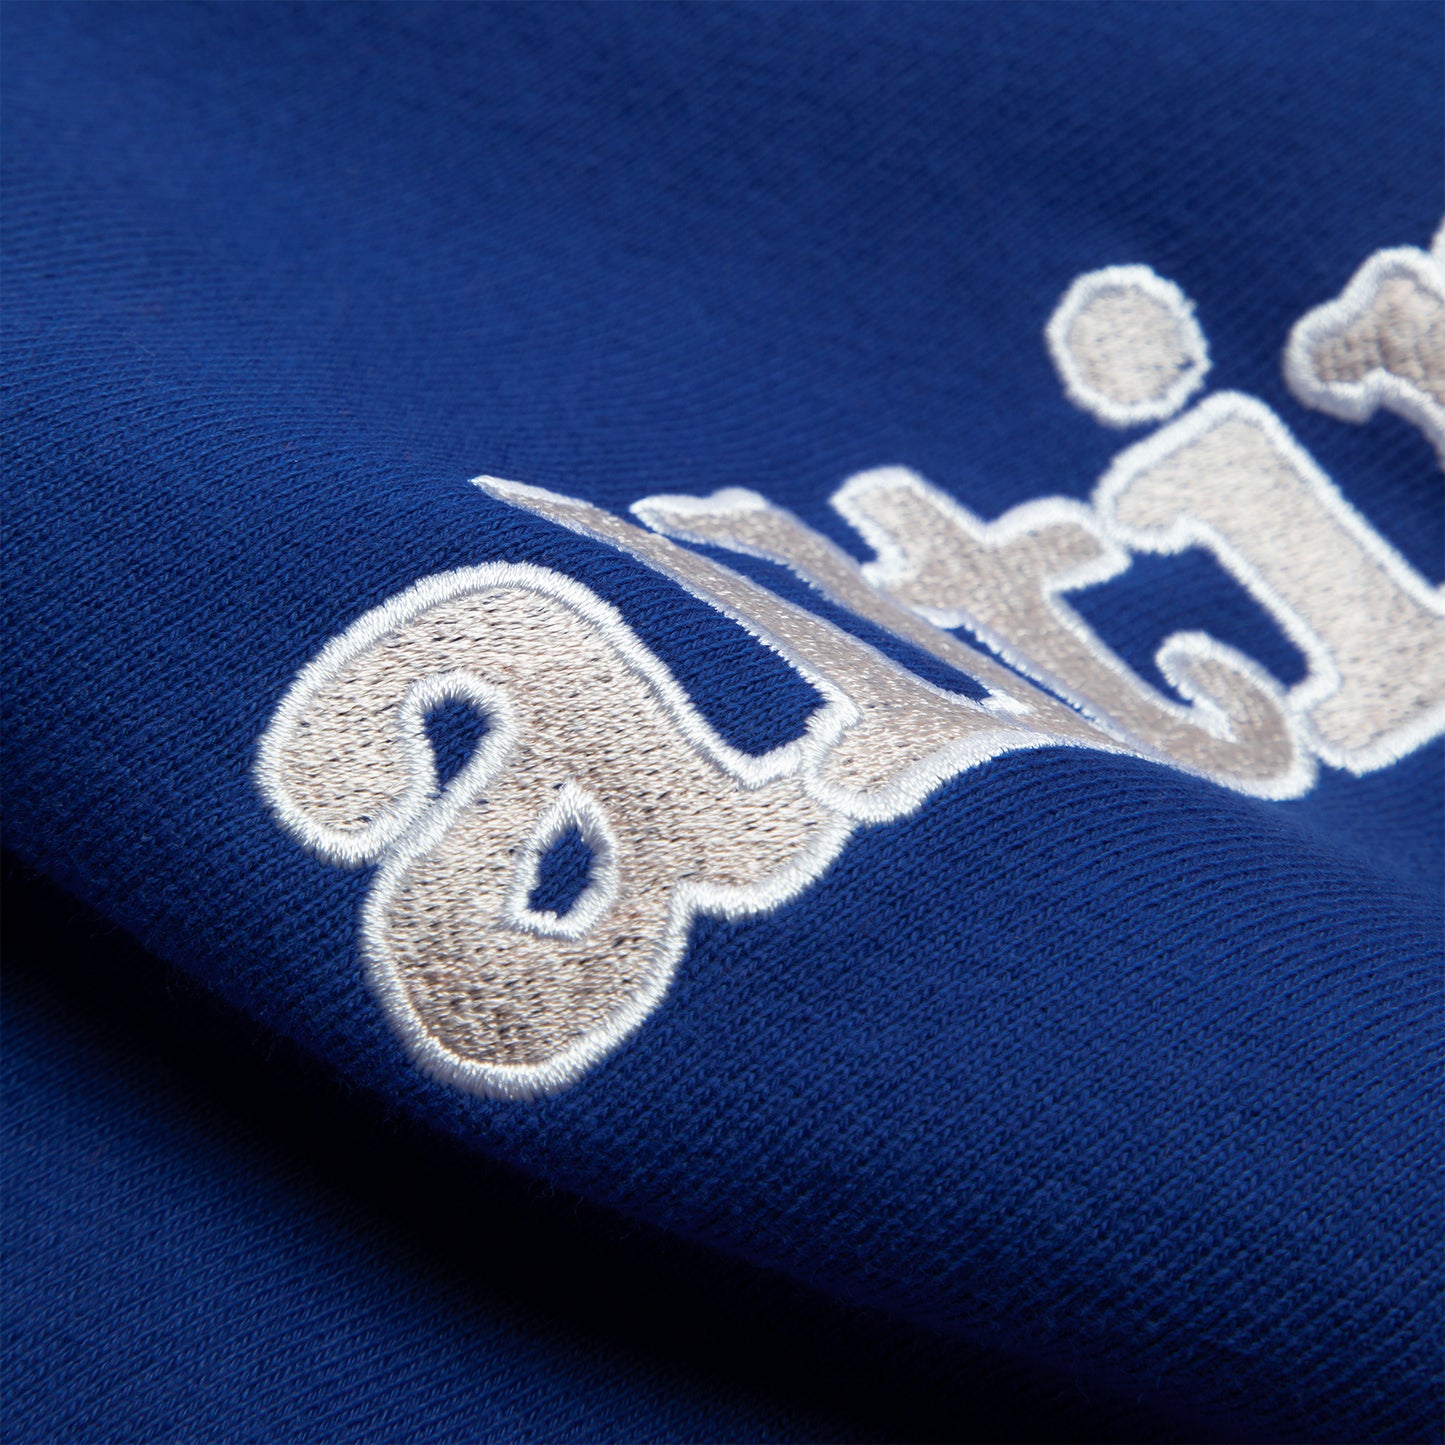 Alltimers Stamped Embroidered Heavyweight Crew (Royal Blue)